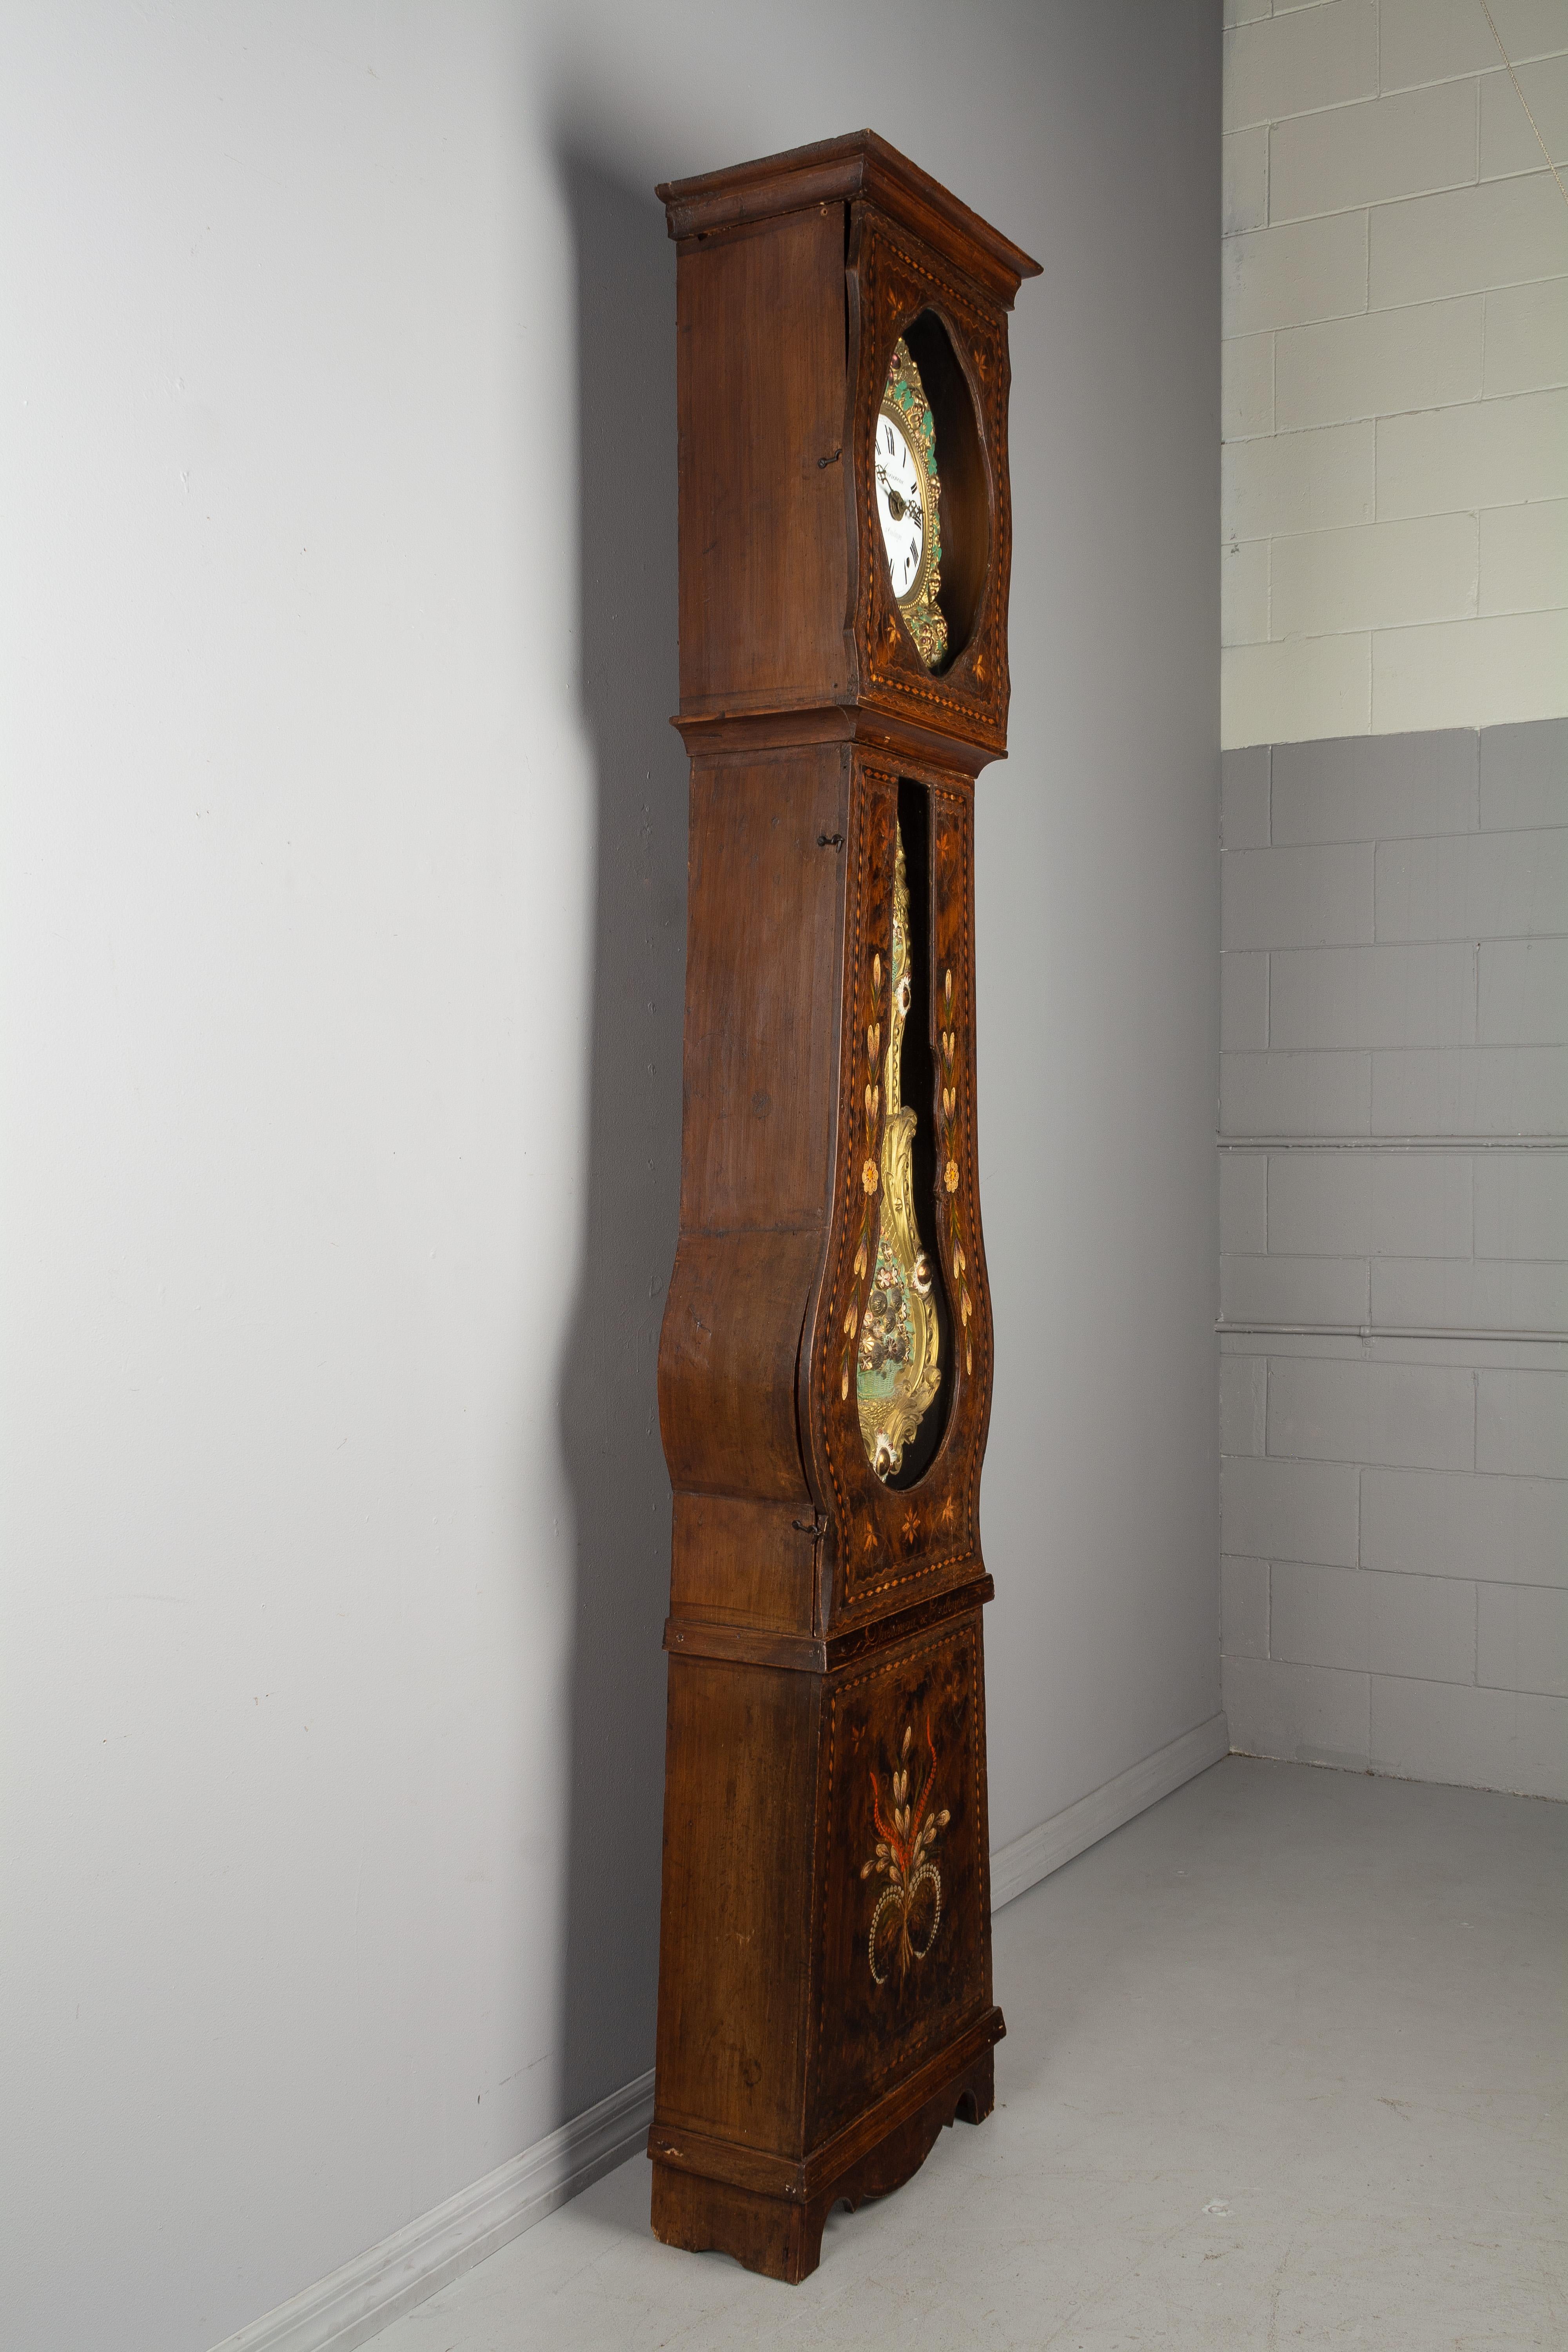 A beautiful 19th century country French comtoise, or grandfather clock, with polychrome painted pine case and embossed brass pendulum. Original seven day Morbier movement, professionally cleaned and in working order, with a bell chiming on the hour,